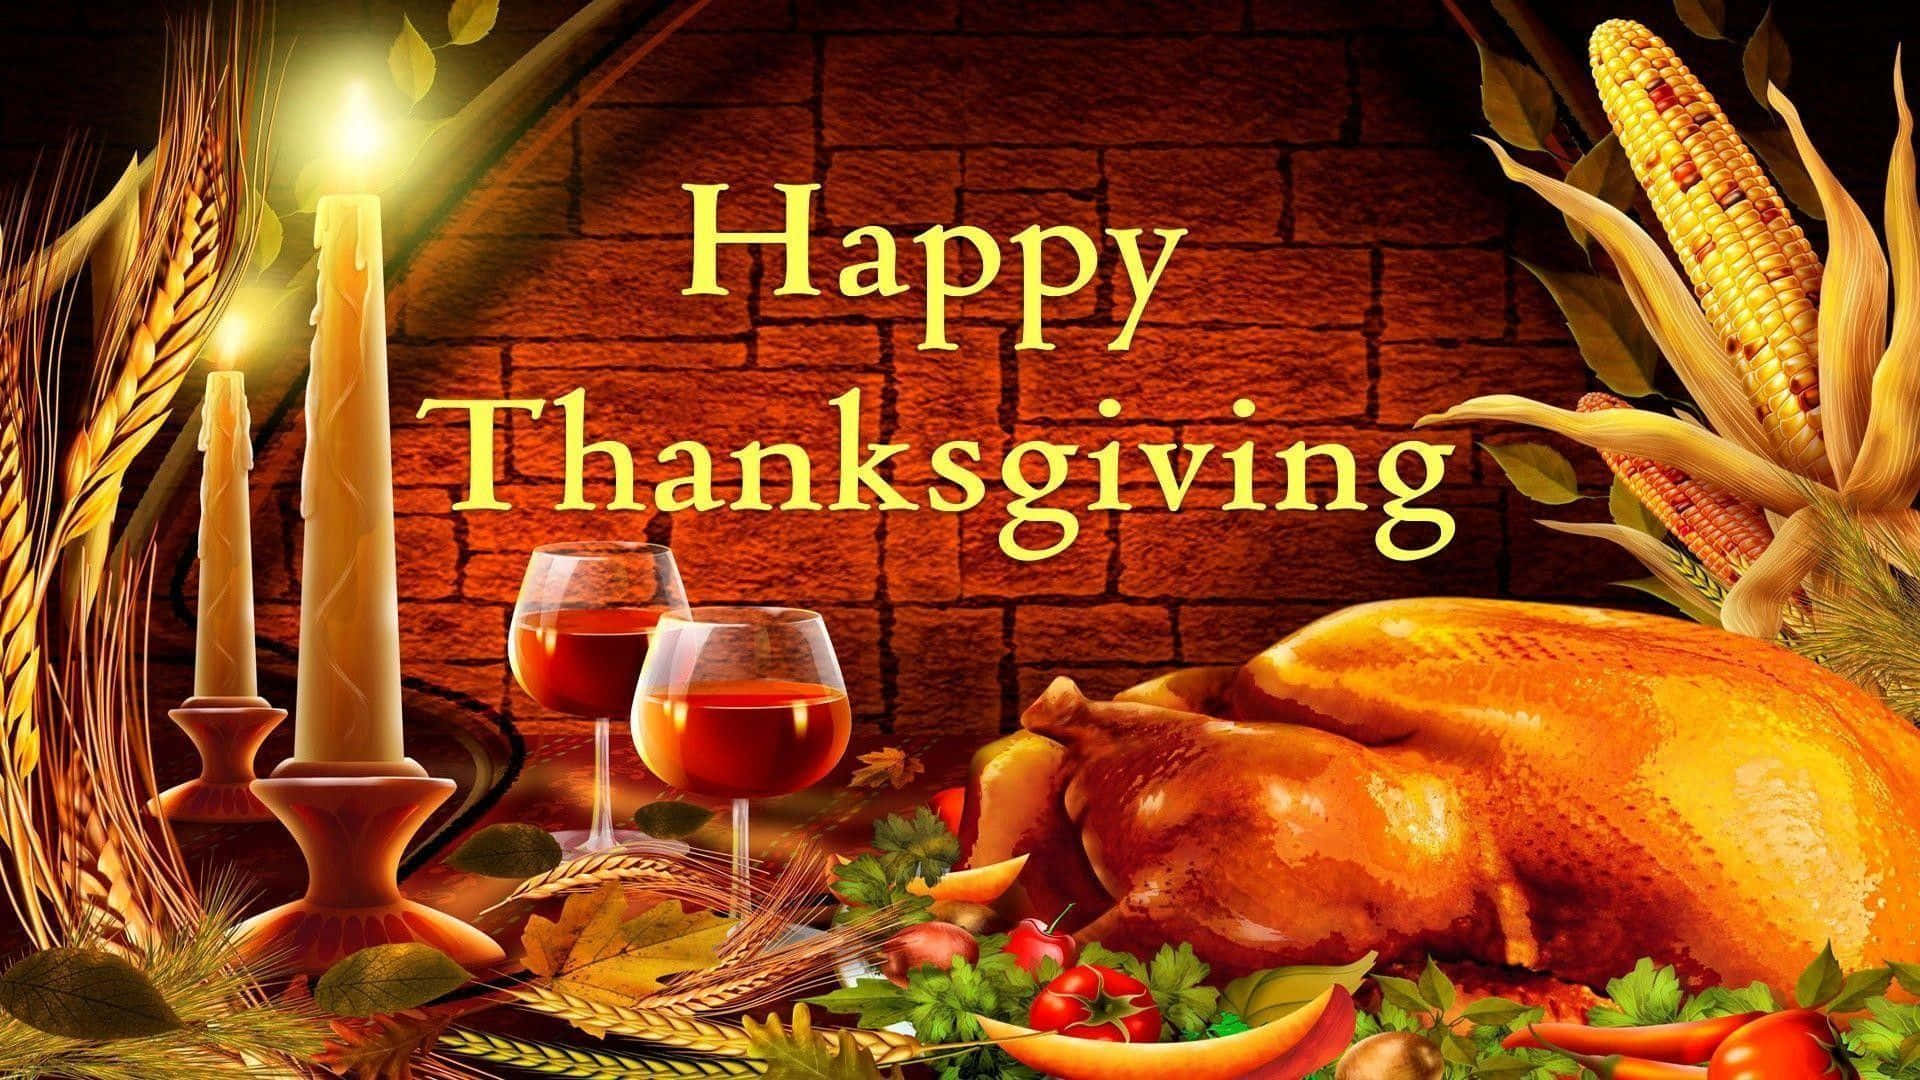 Wishing You A Happy Thanksgiving! Background